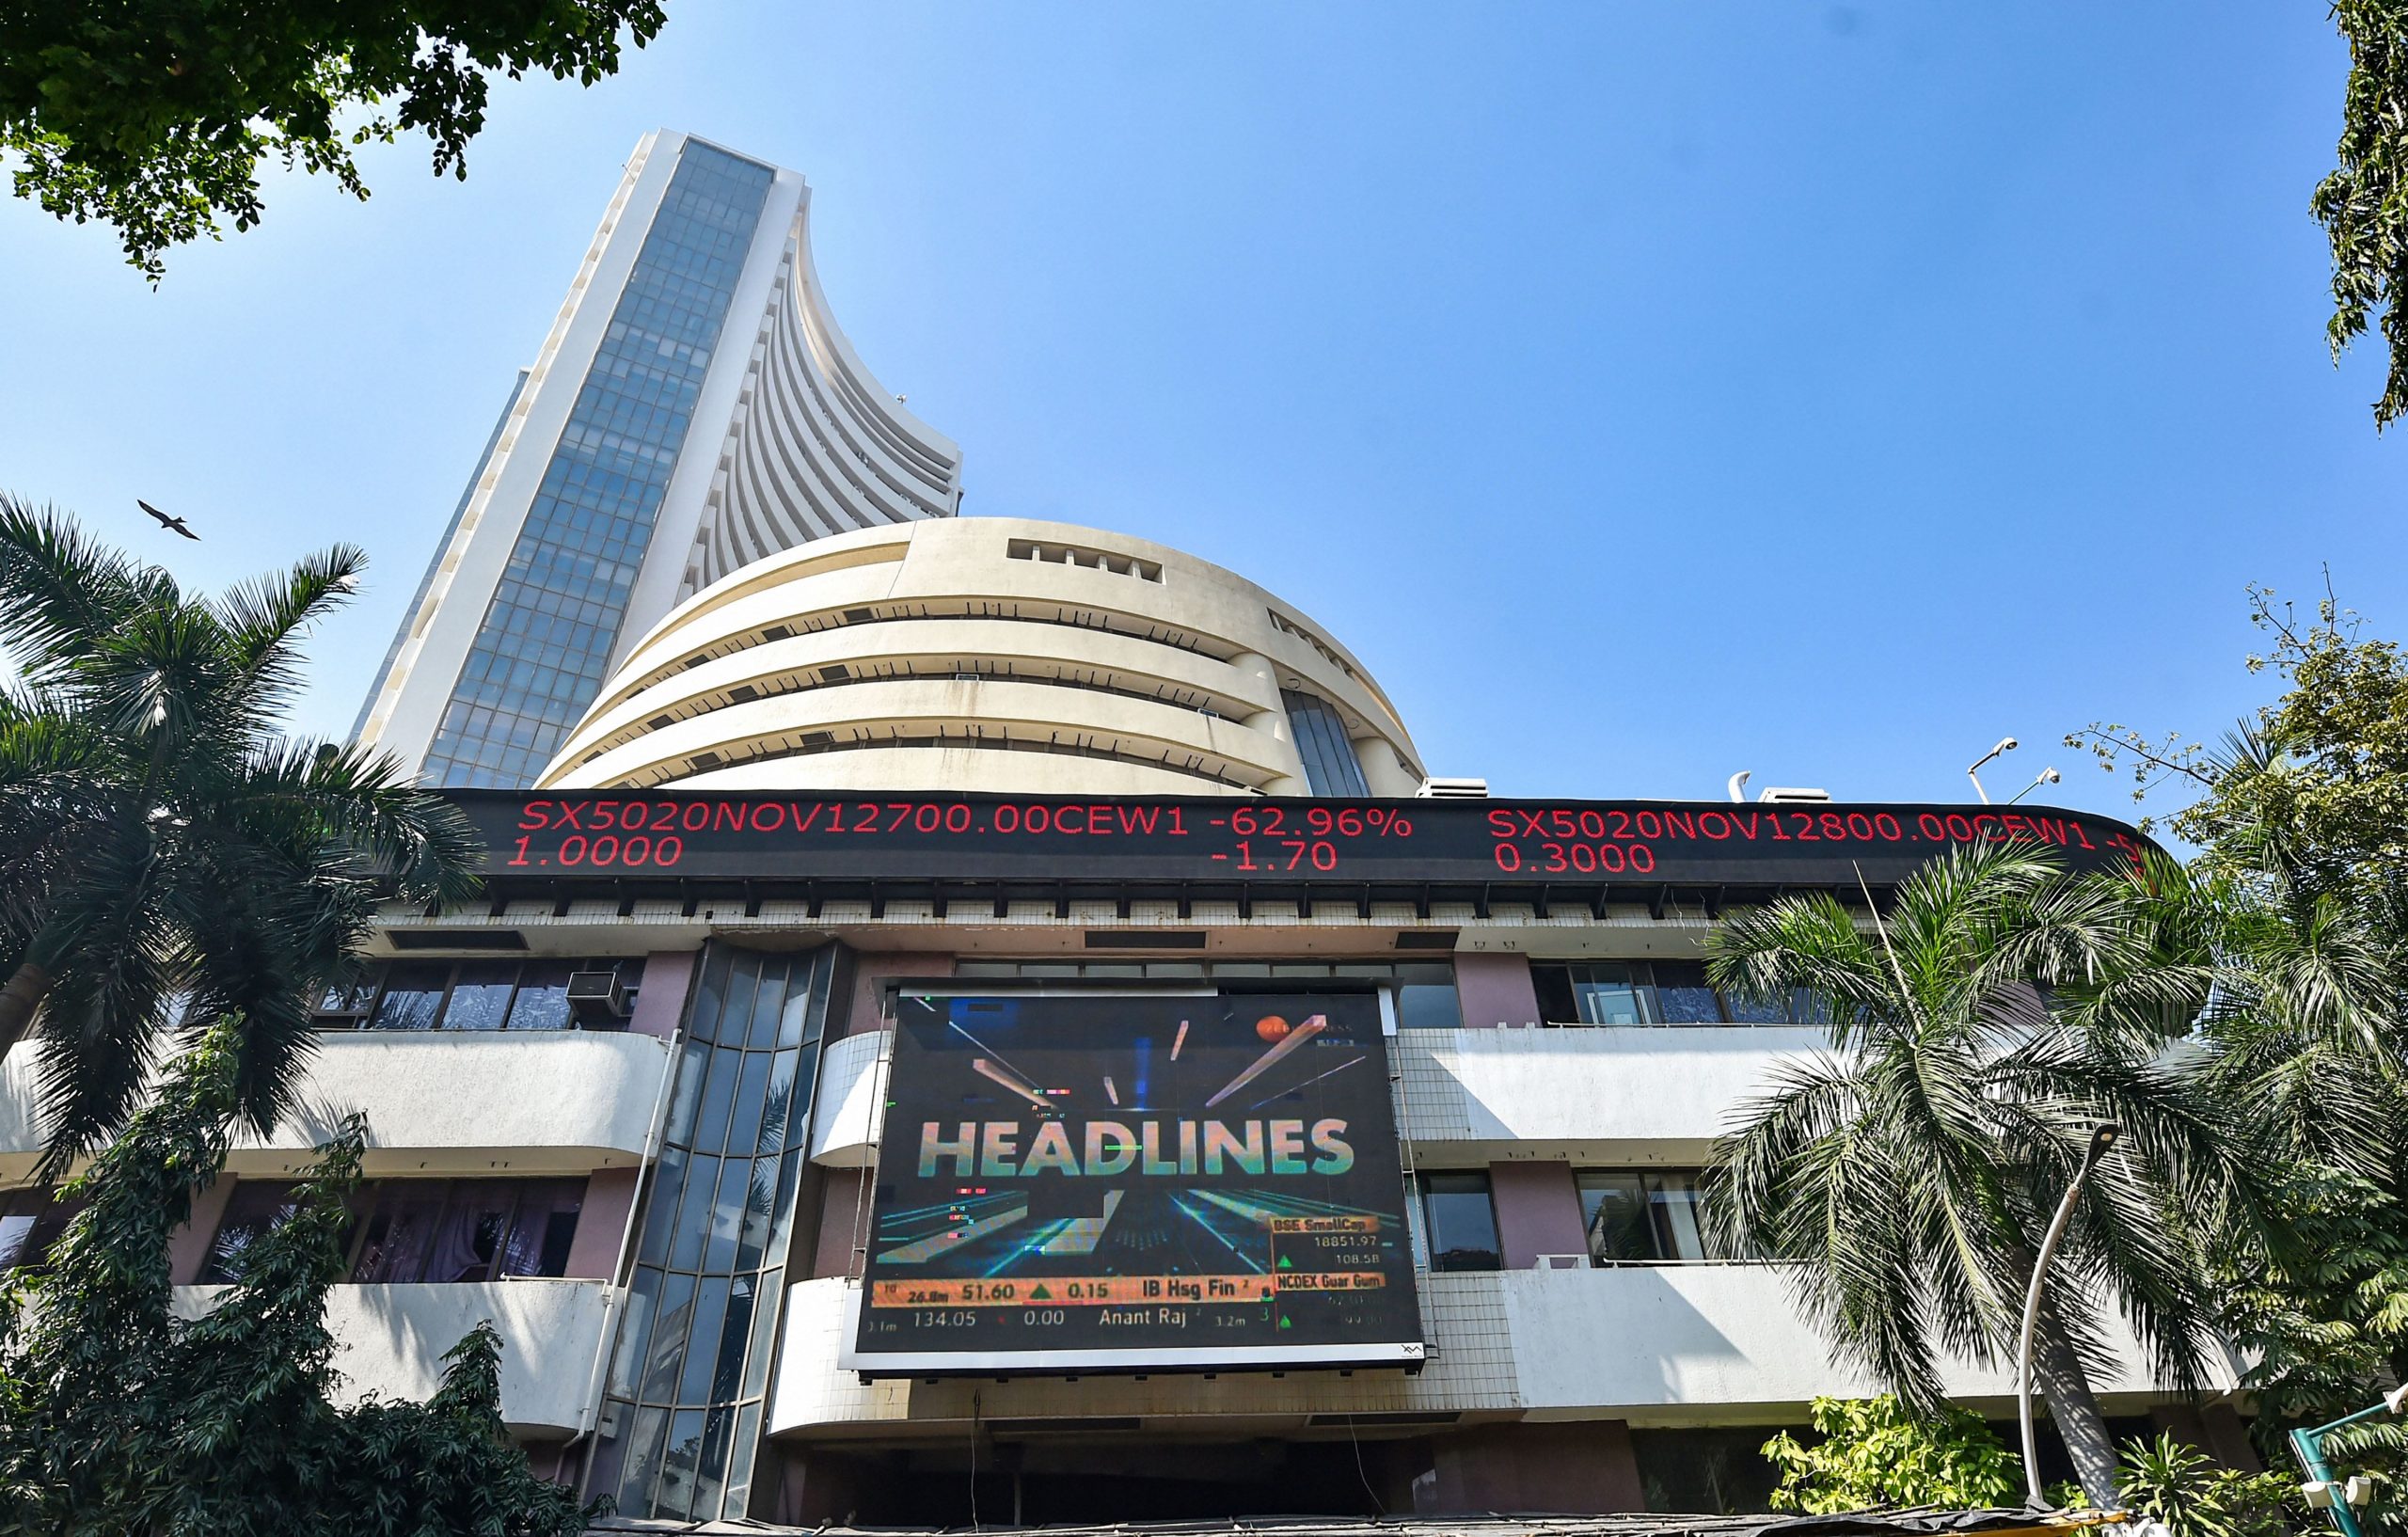 Trending Stocks: Reliance, Zydus, SpiceJet and others in news today